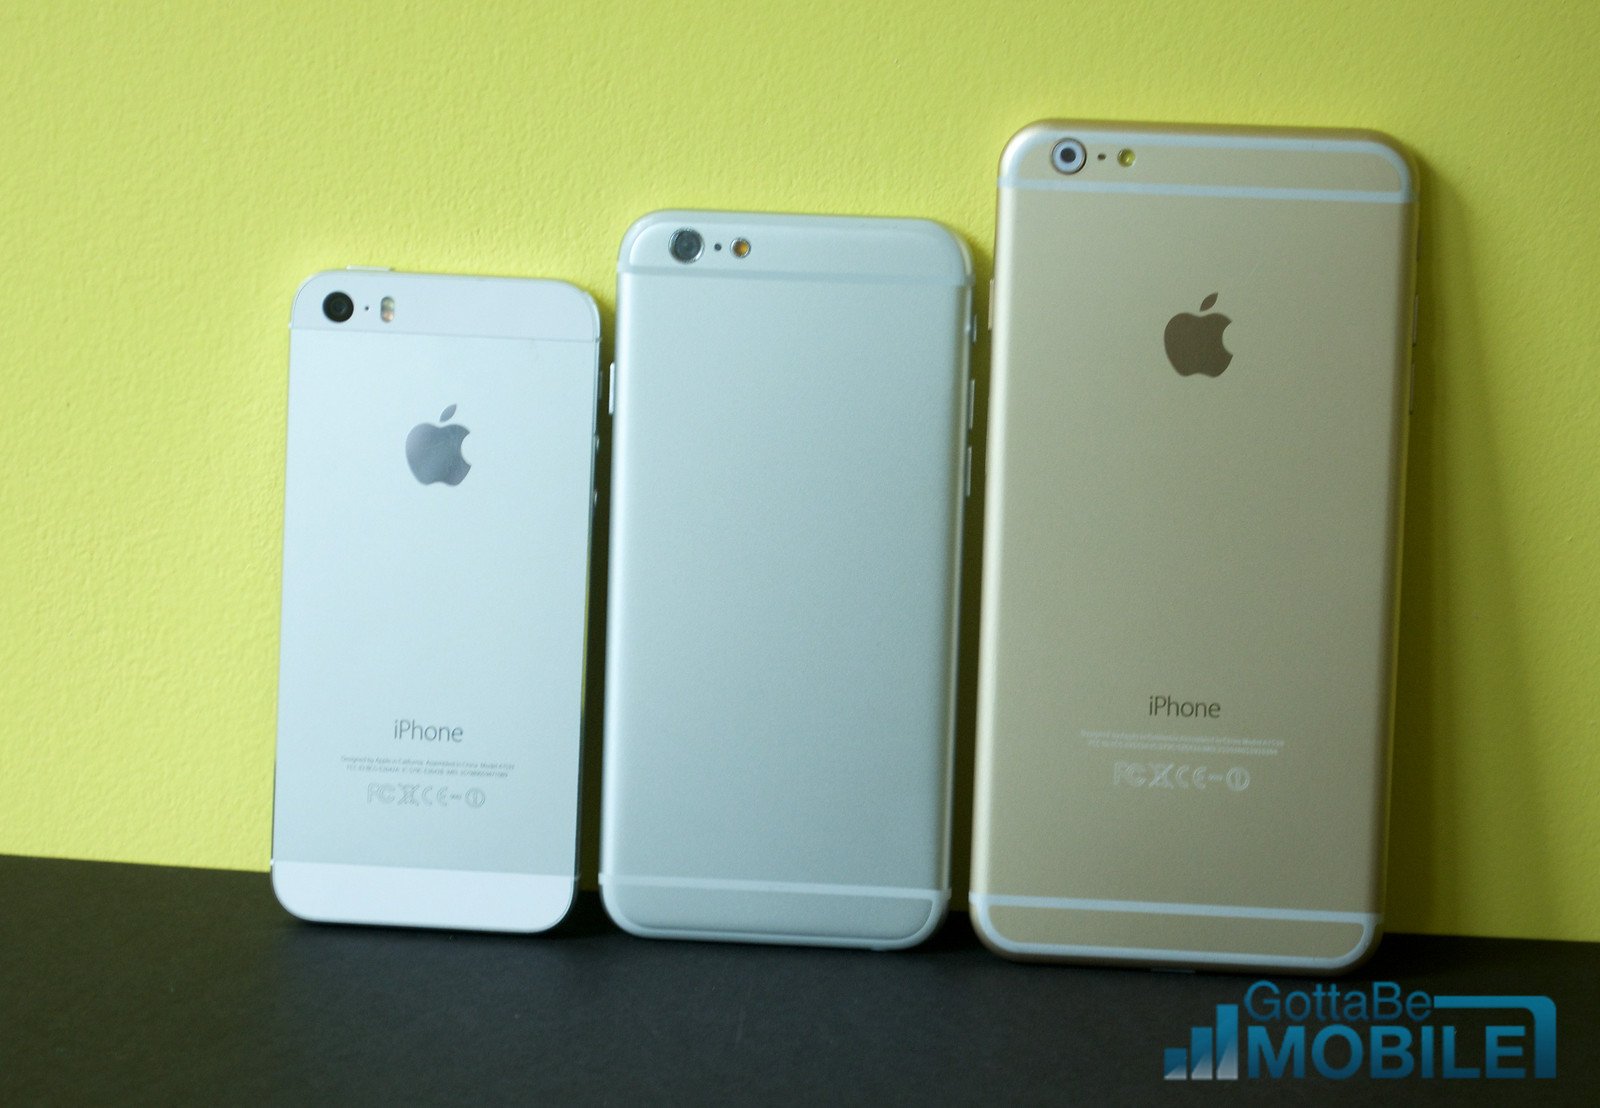 The iPhone 6 launch date could bring more than just new iPhones.